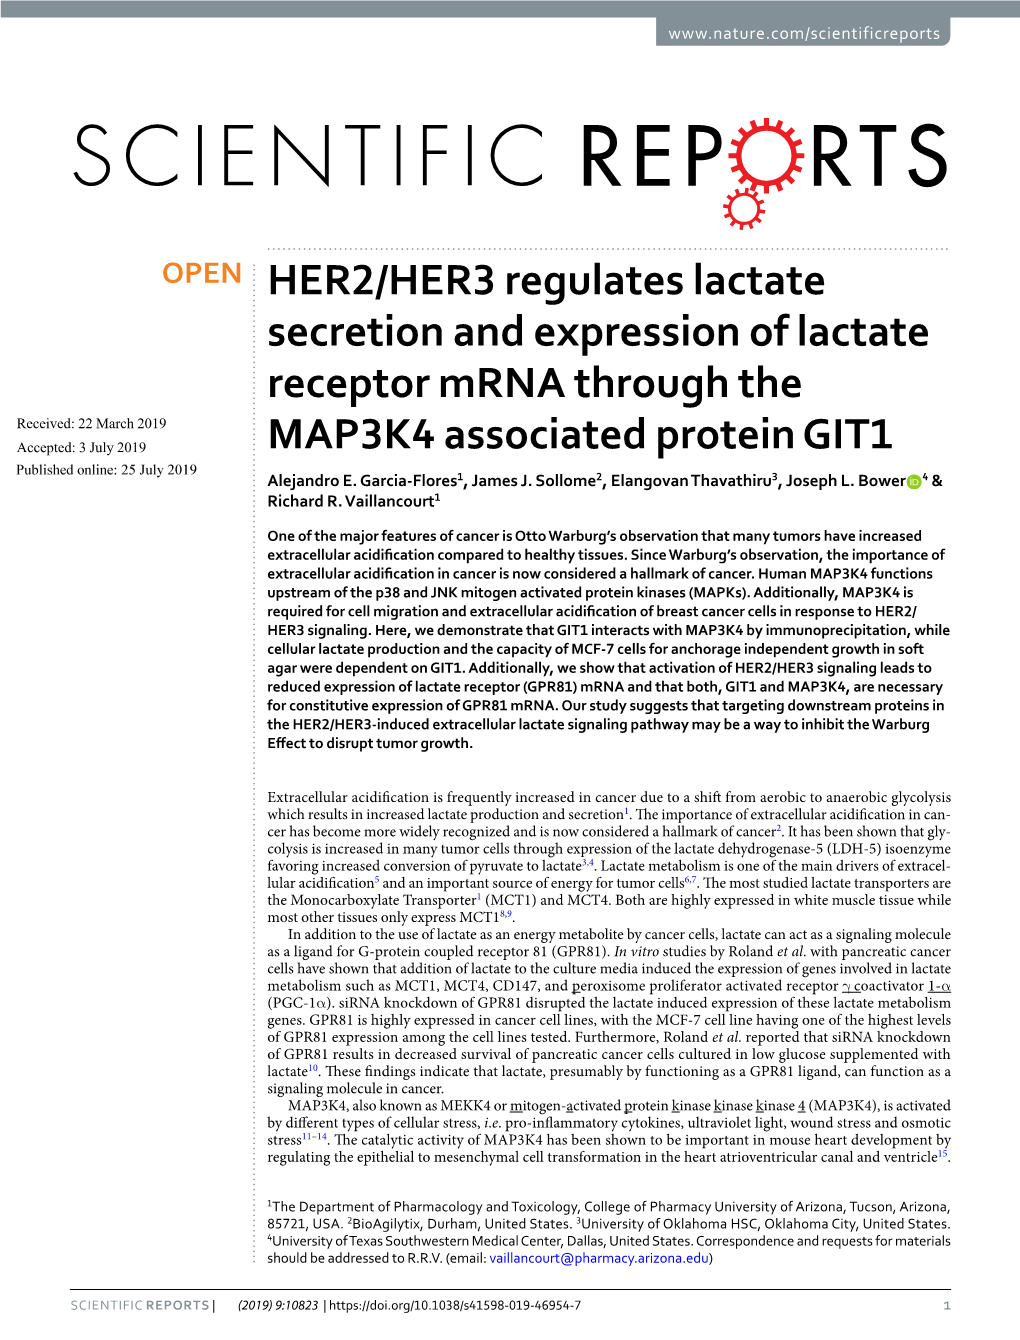 HER2/HER3 Regulates Lactate Secretion and Expression of Lactate